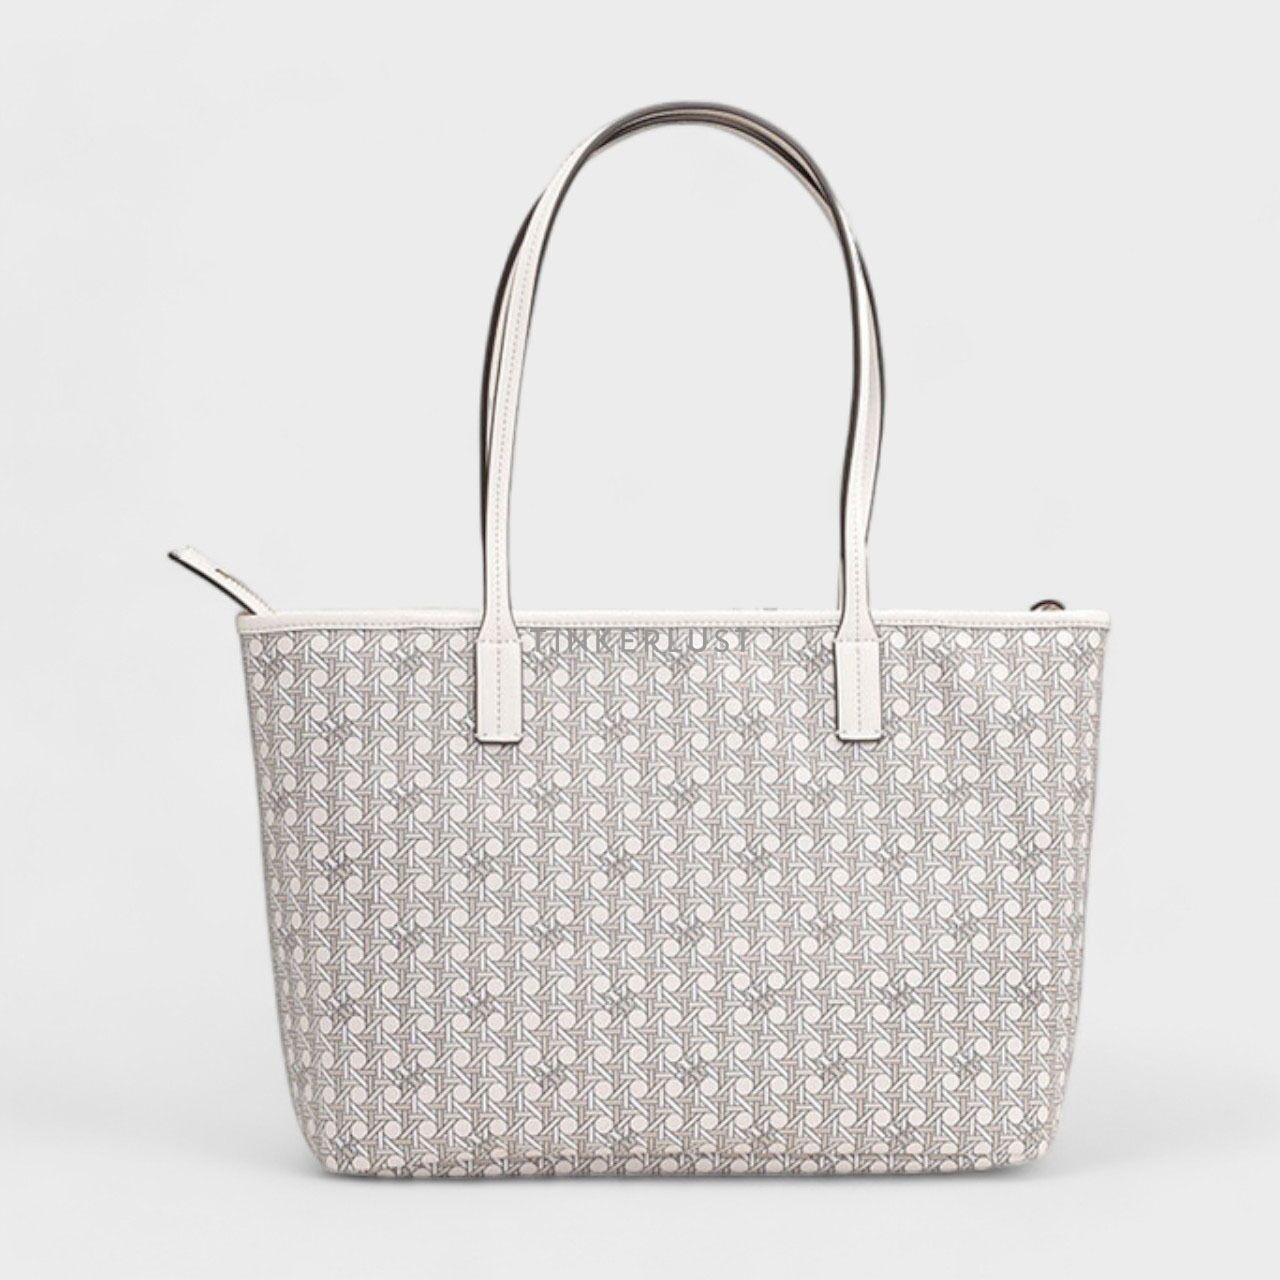 Tory Burch Ever-Ready Zip Small White Ivory Tote Bag